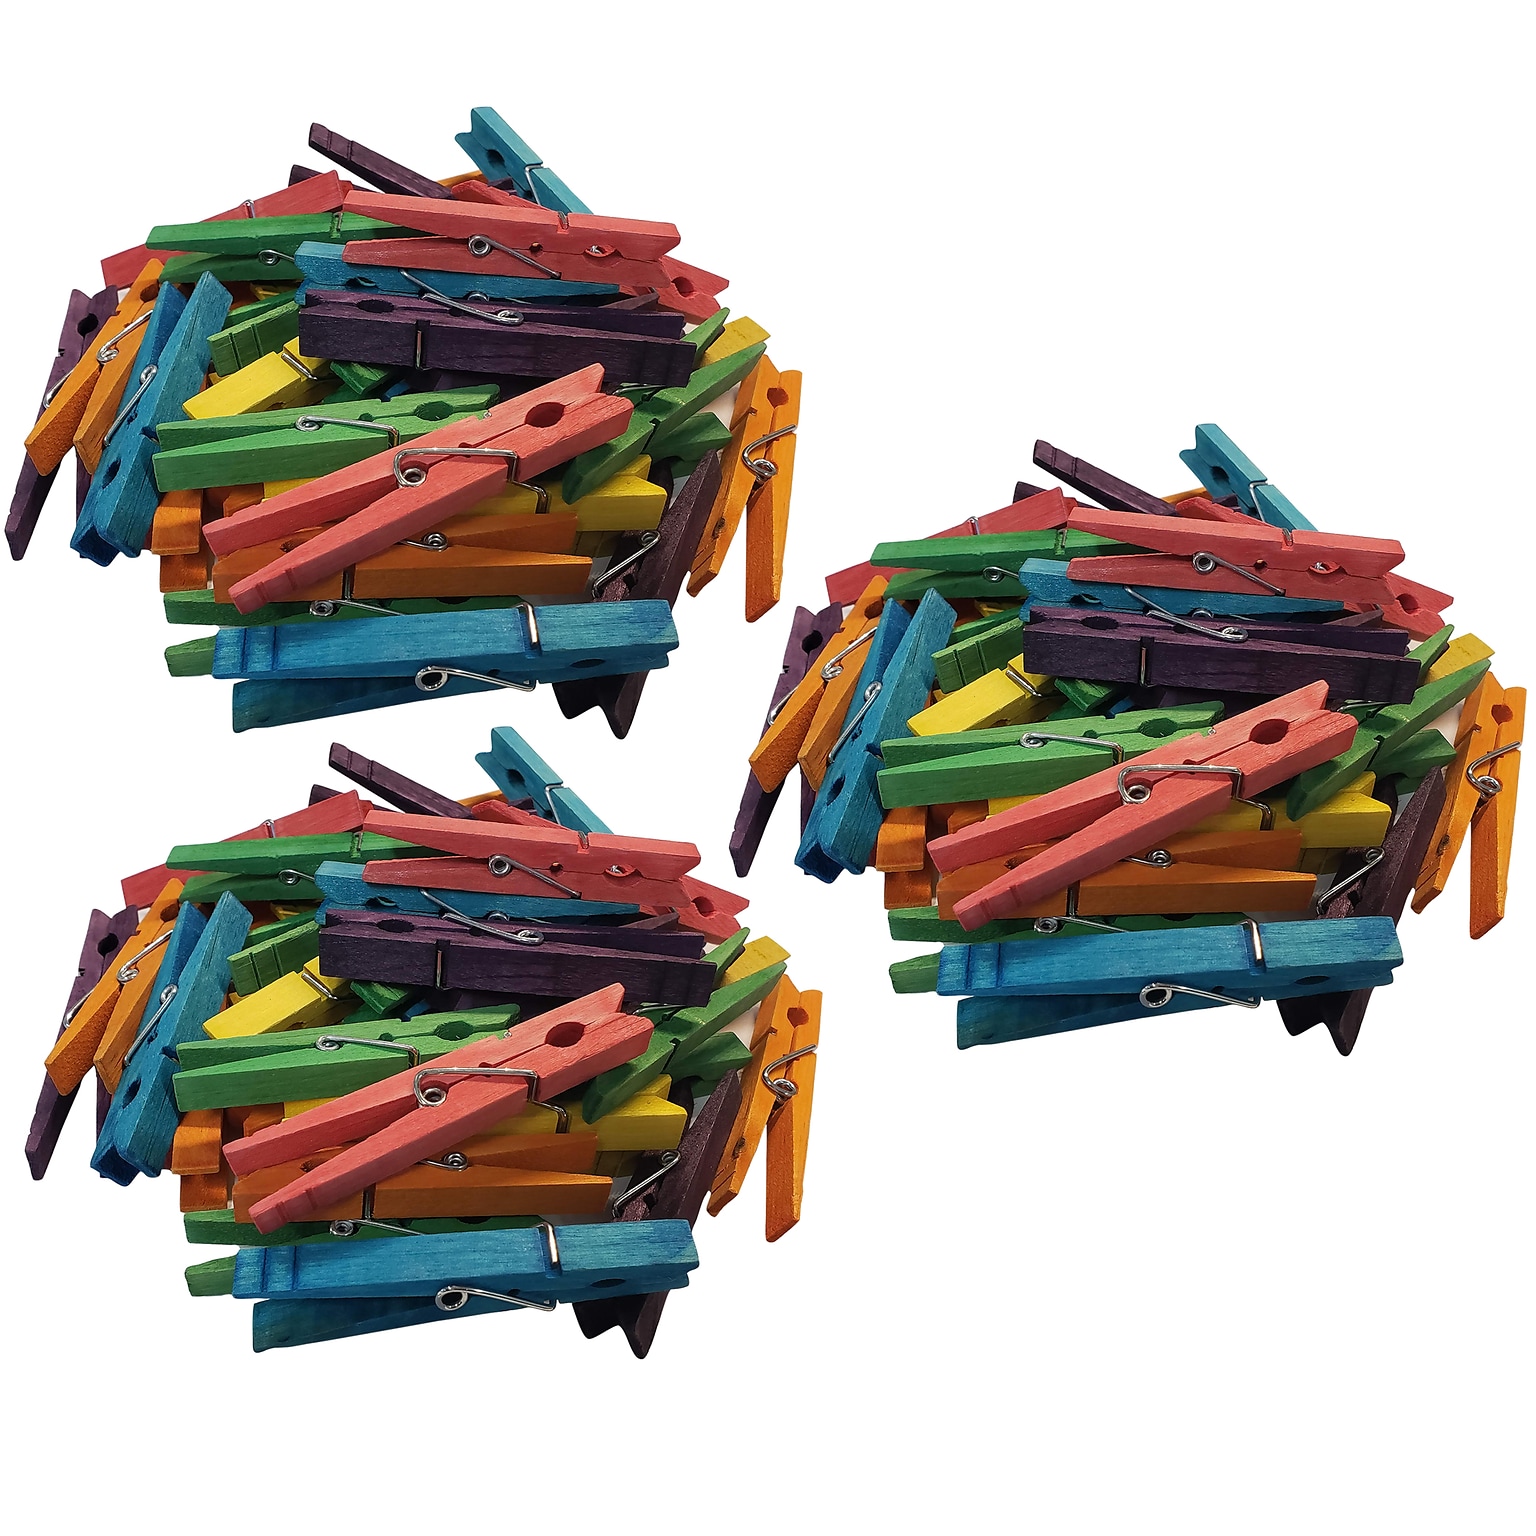 Teacher Created Resources STEM Basics: Multicolor Clothespins, 50 Per Pack, 3 Packs (TCR20933-3)